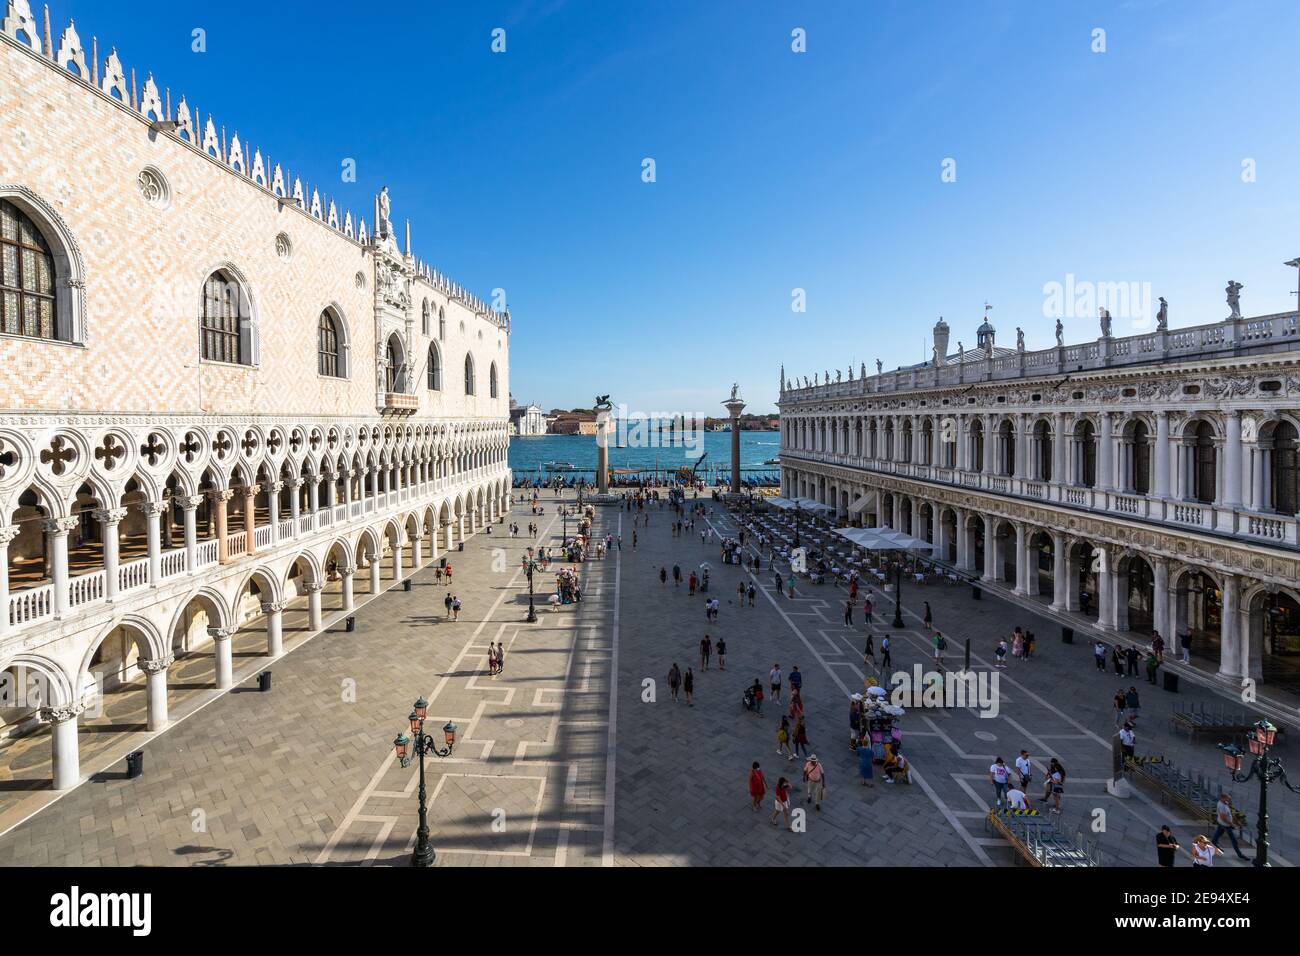 View of St. Mark's Square from the Basilica: on the right, the Doge's Palace (Palazzo Ducale), on the left the Marciana, Venice, Italy Stock Photo